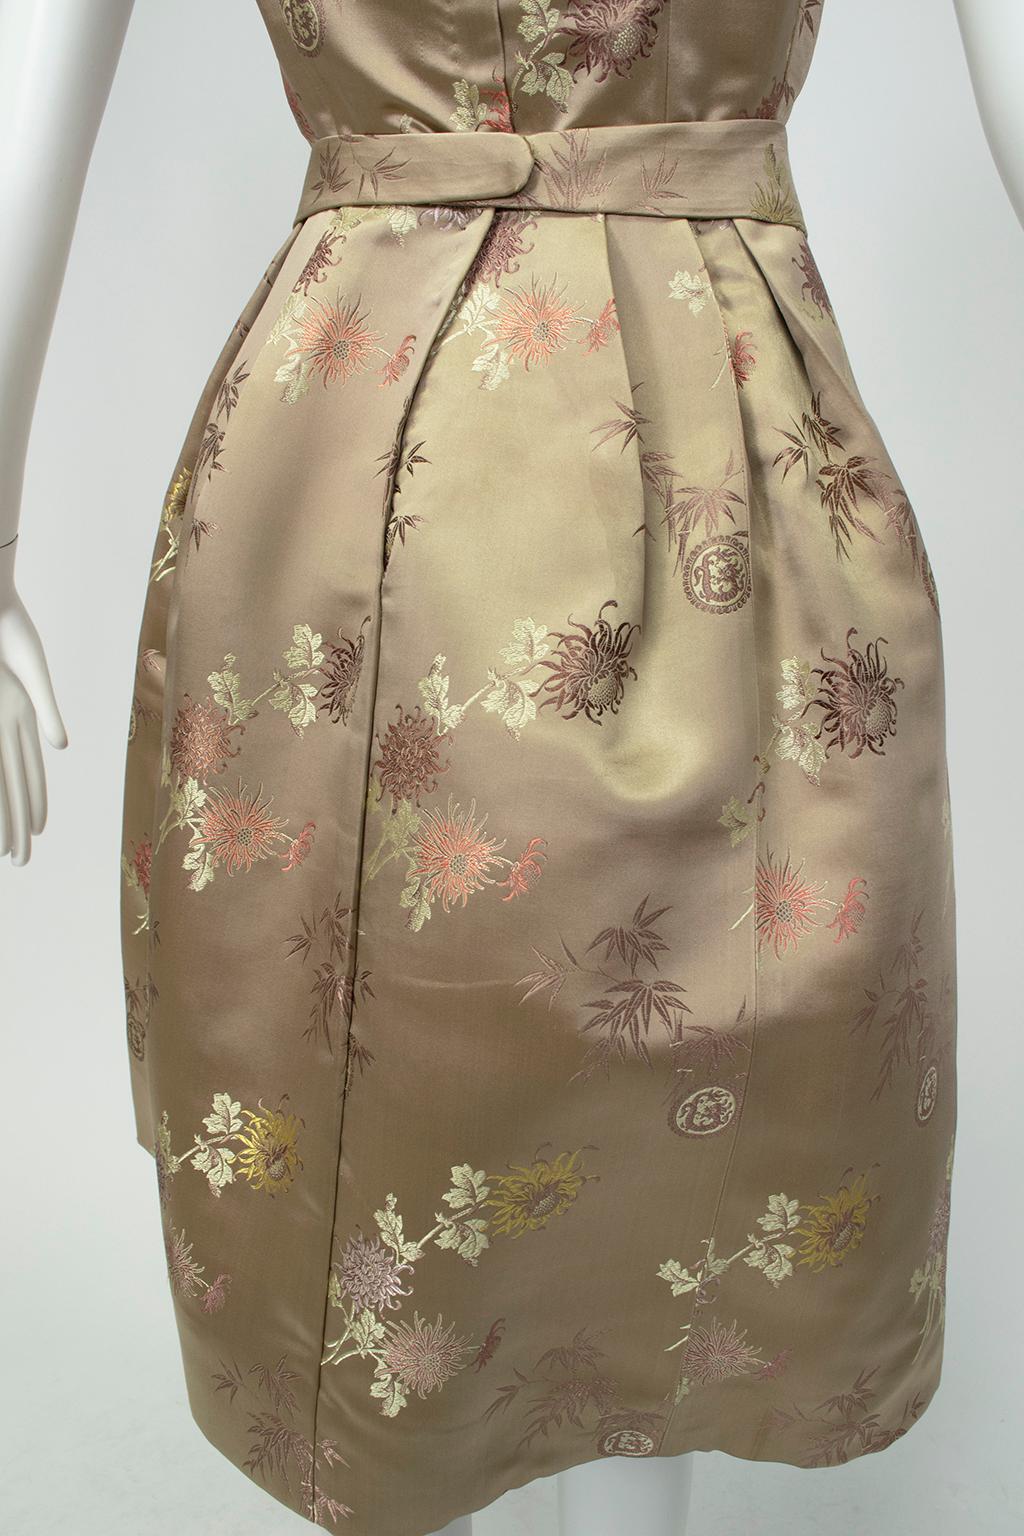 Jacques Cassia Haute Couture Taupe Brocade Corolle Tulip Skirt Dress - S, 1960s For Sale 5